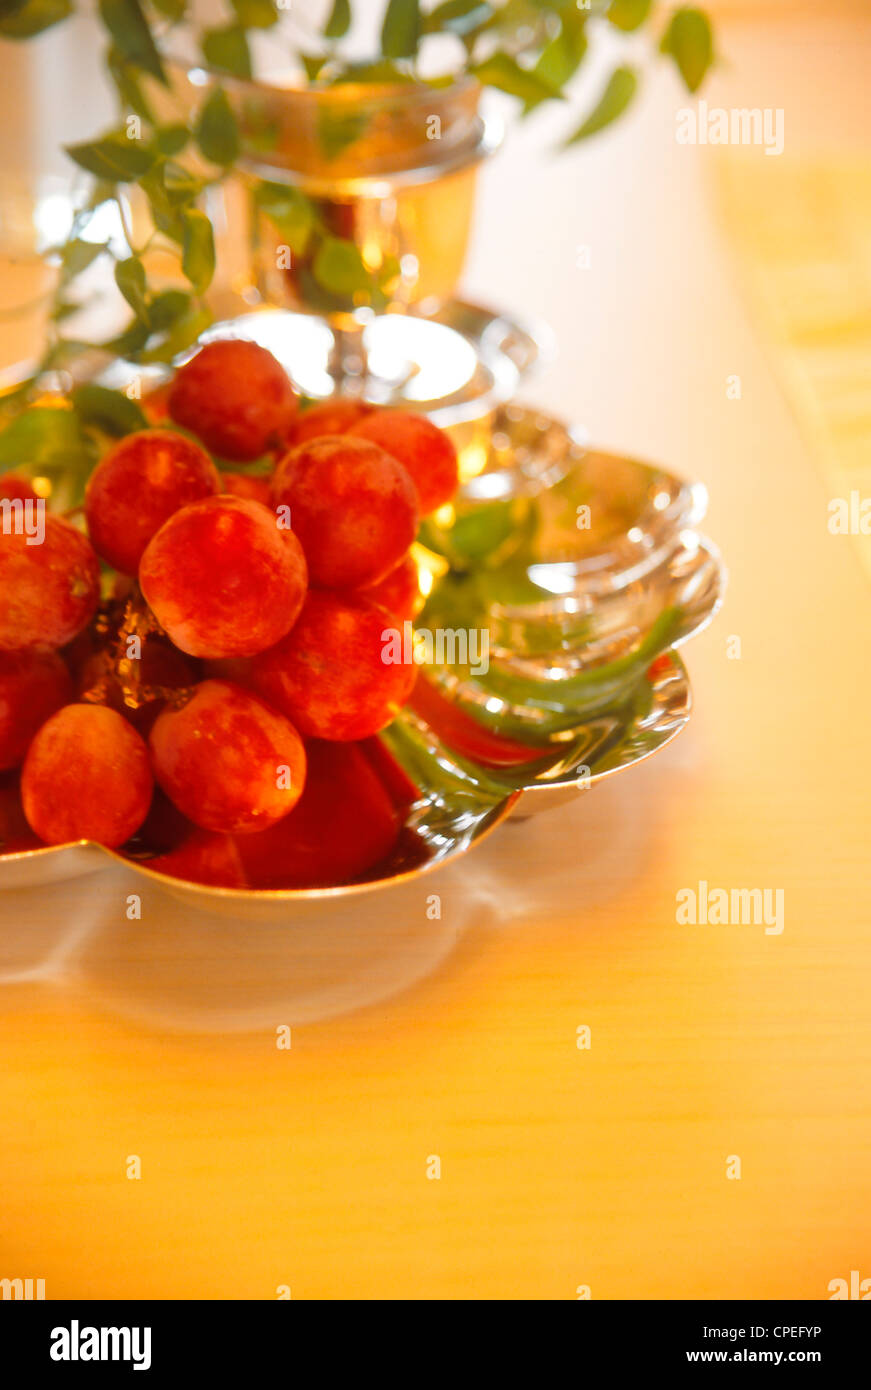 Close Up View Of Fruits In Bowl Stock Photo